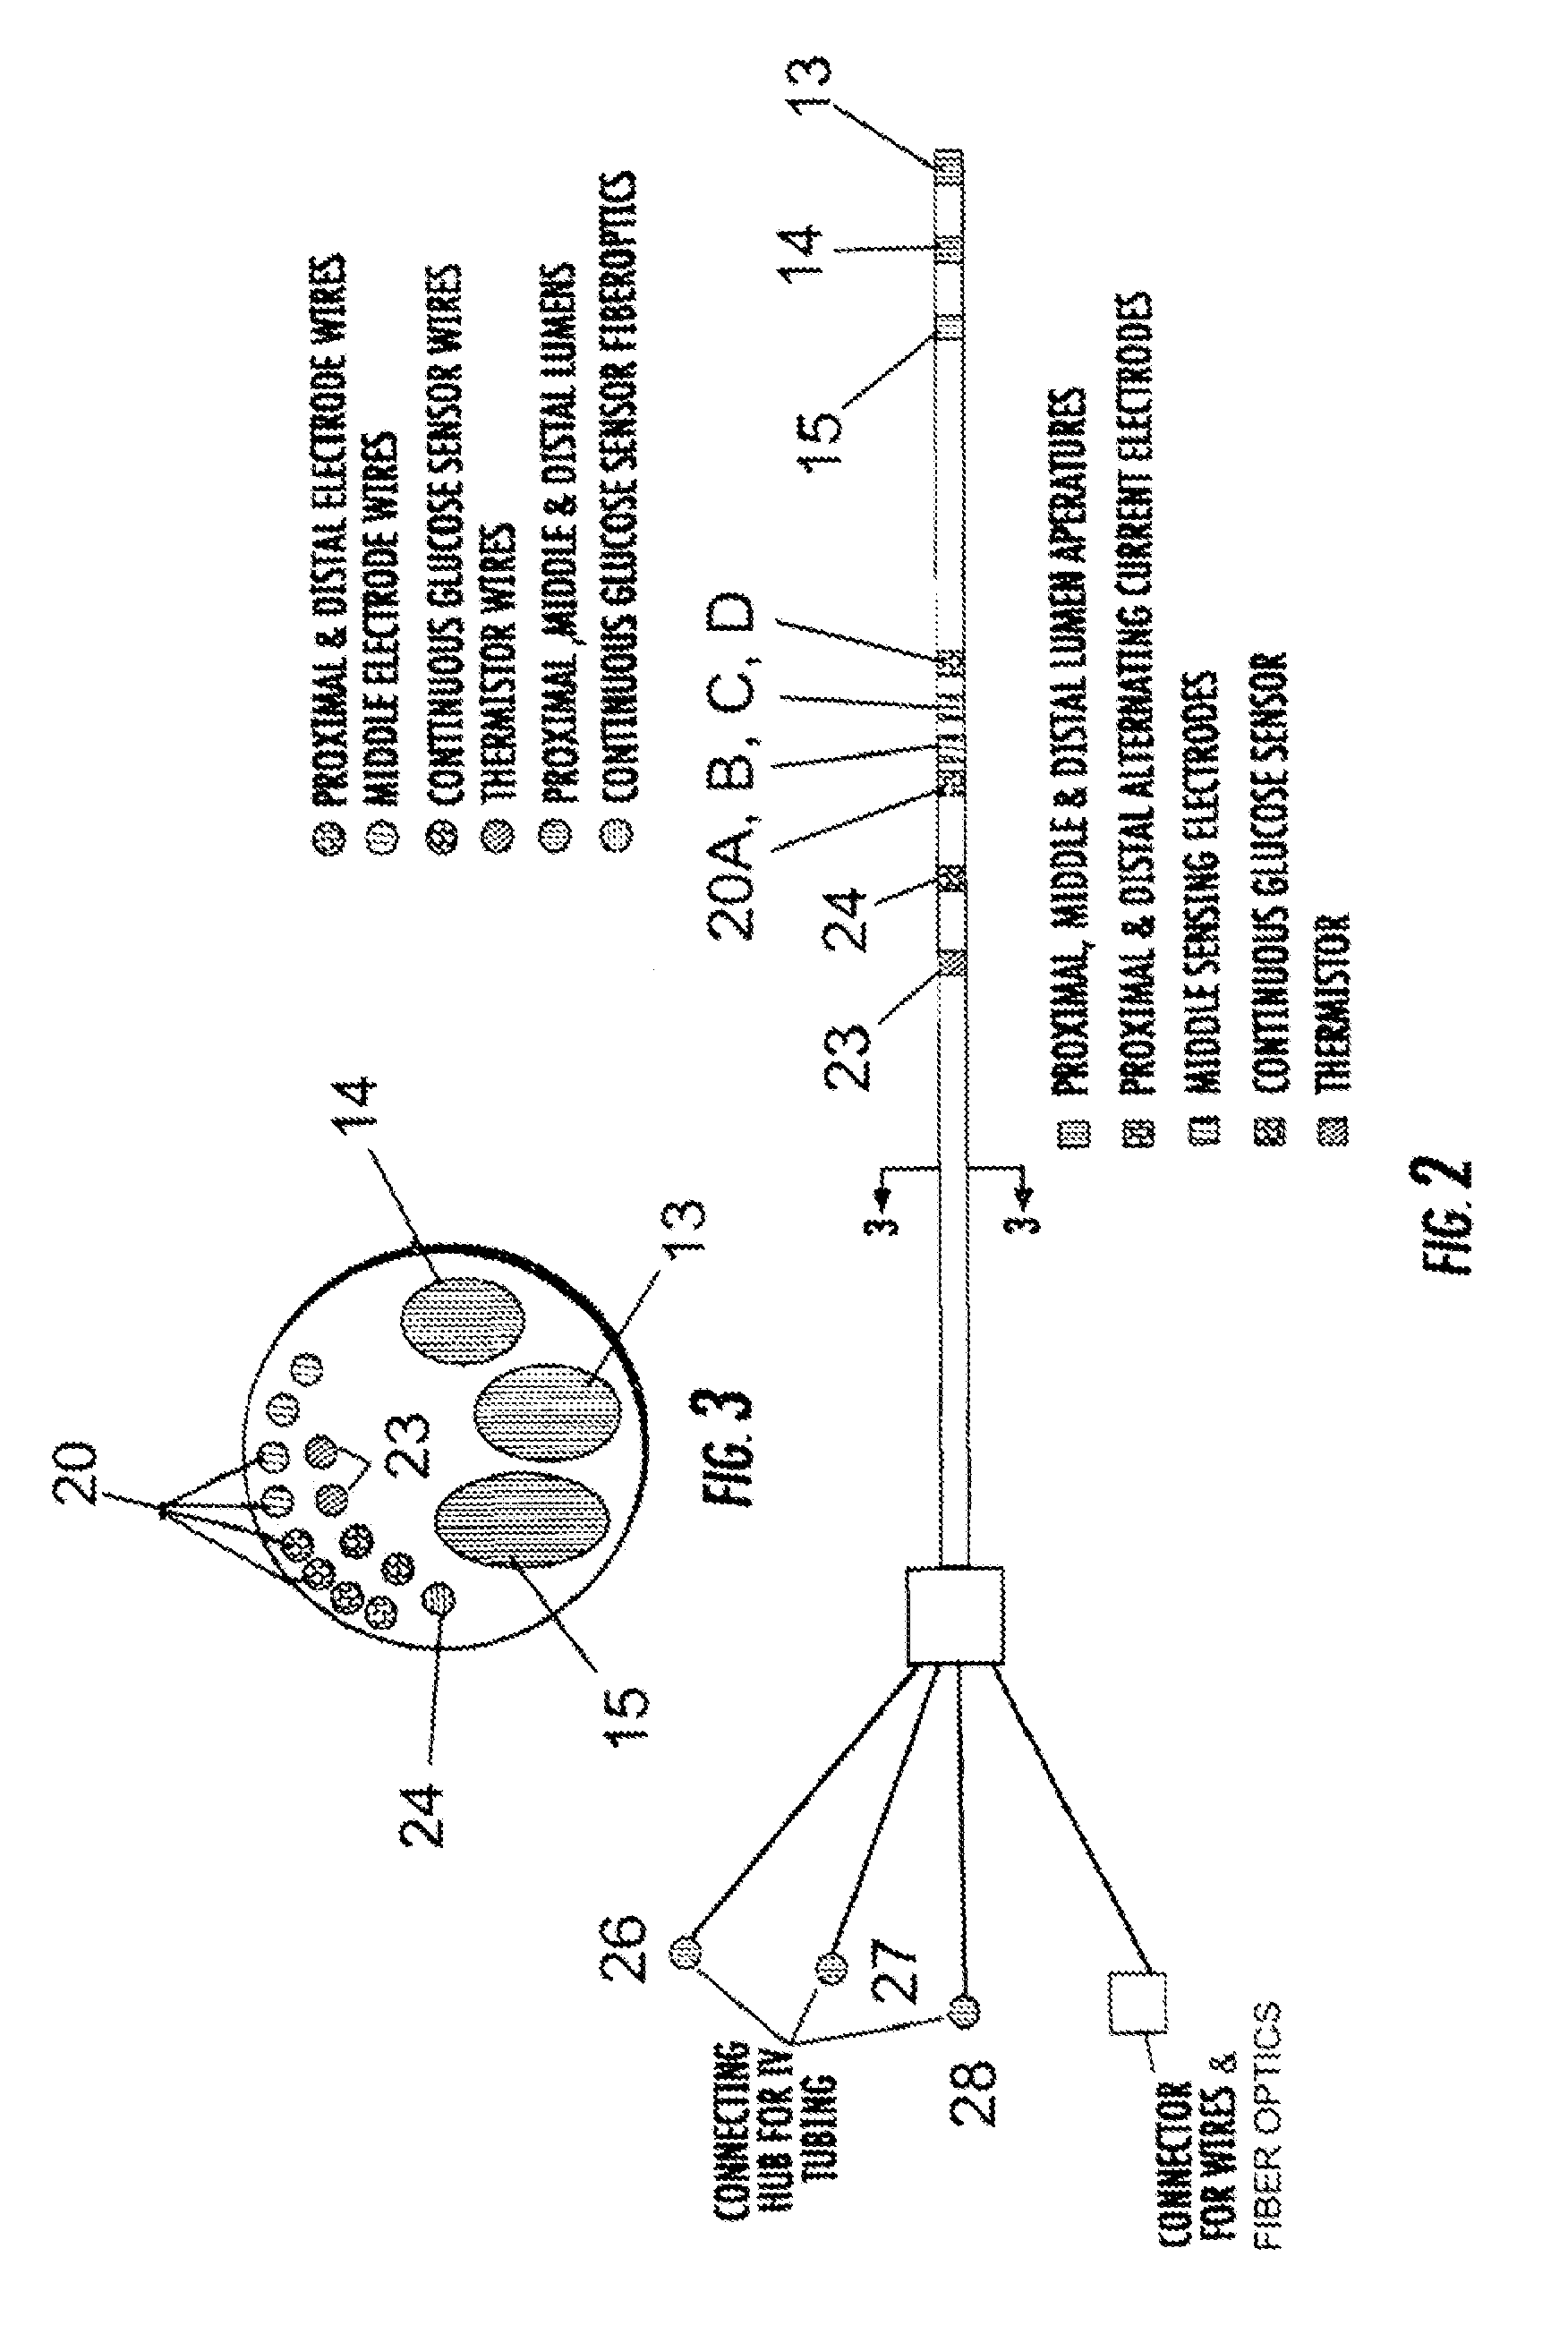 Computerized system for blood chemistry monitoring